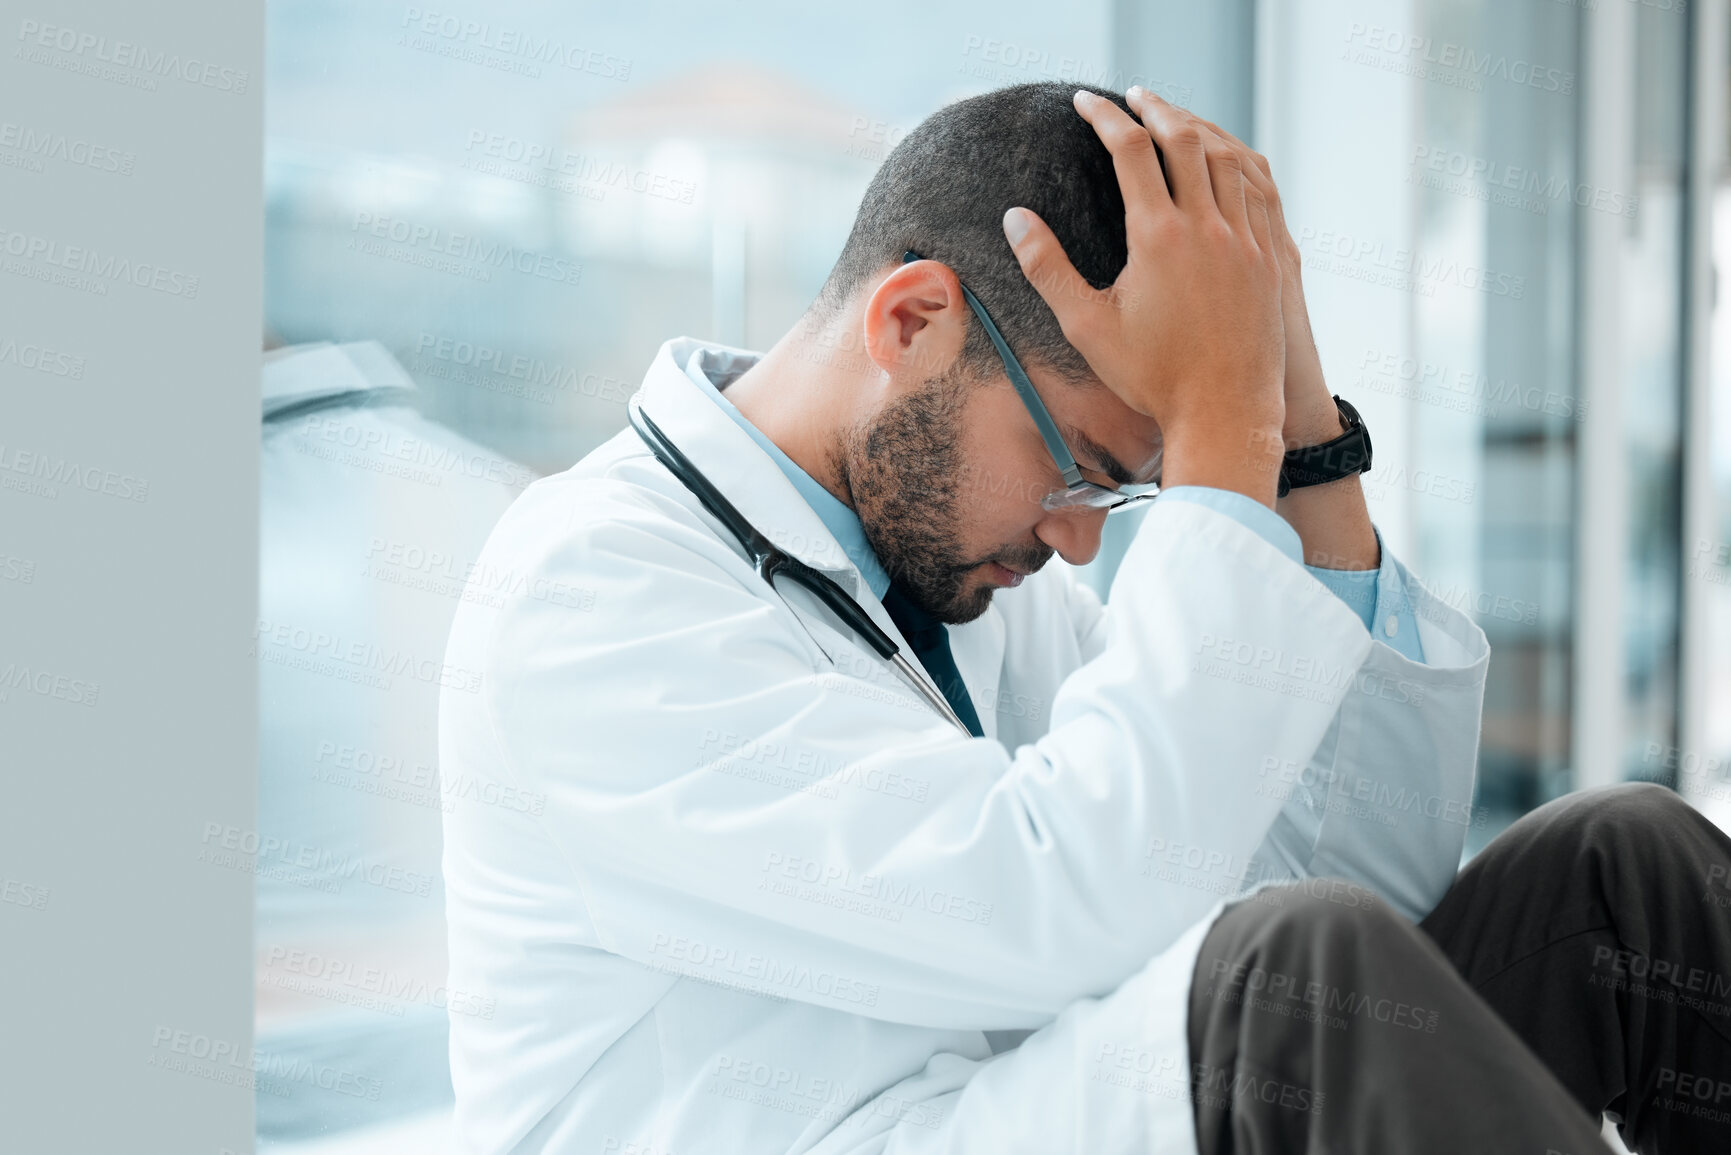 Buy stock photo Shot of a young male doctor looking stressed out while at work at a hospital